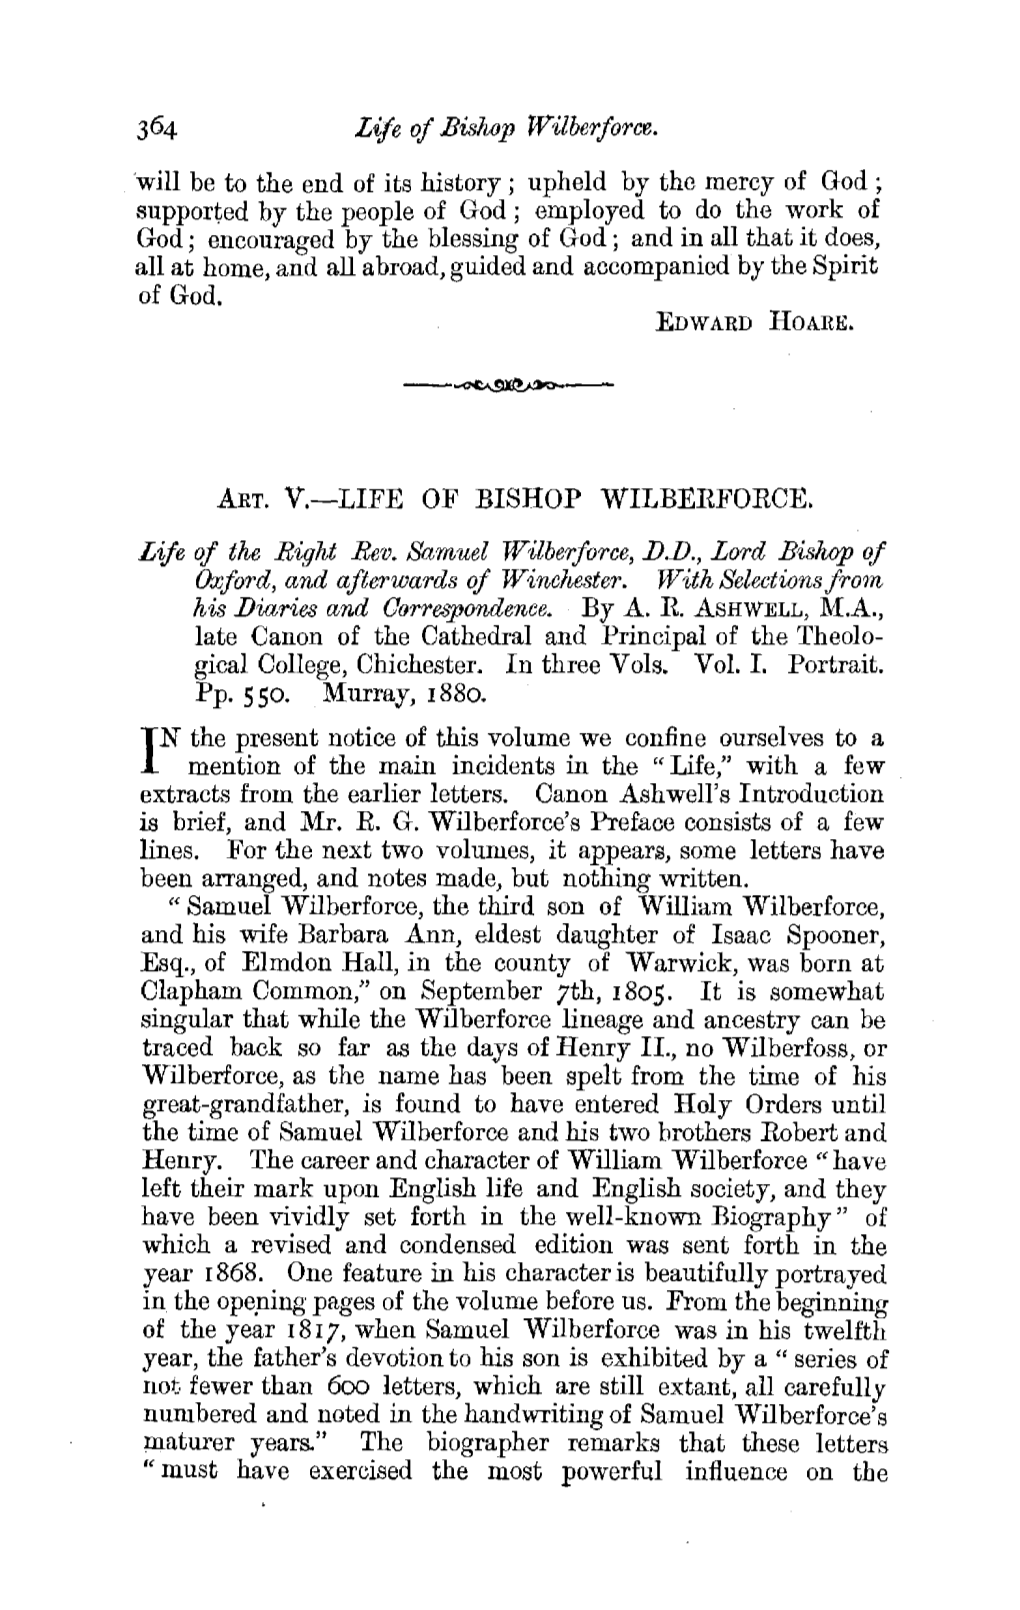 "Life of Bishop Wilberforce (Book Review)," the Churchman